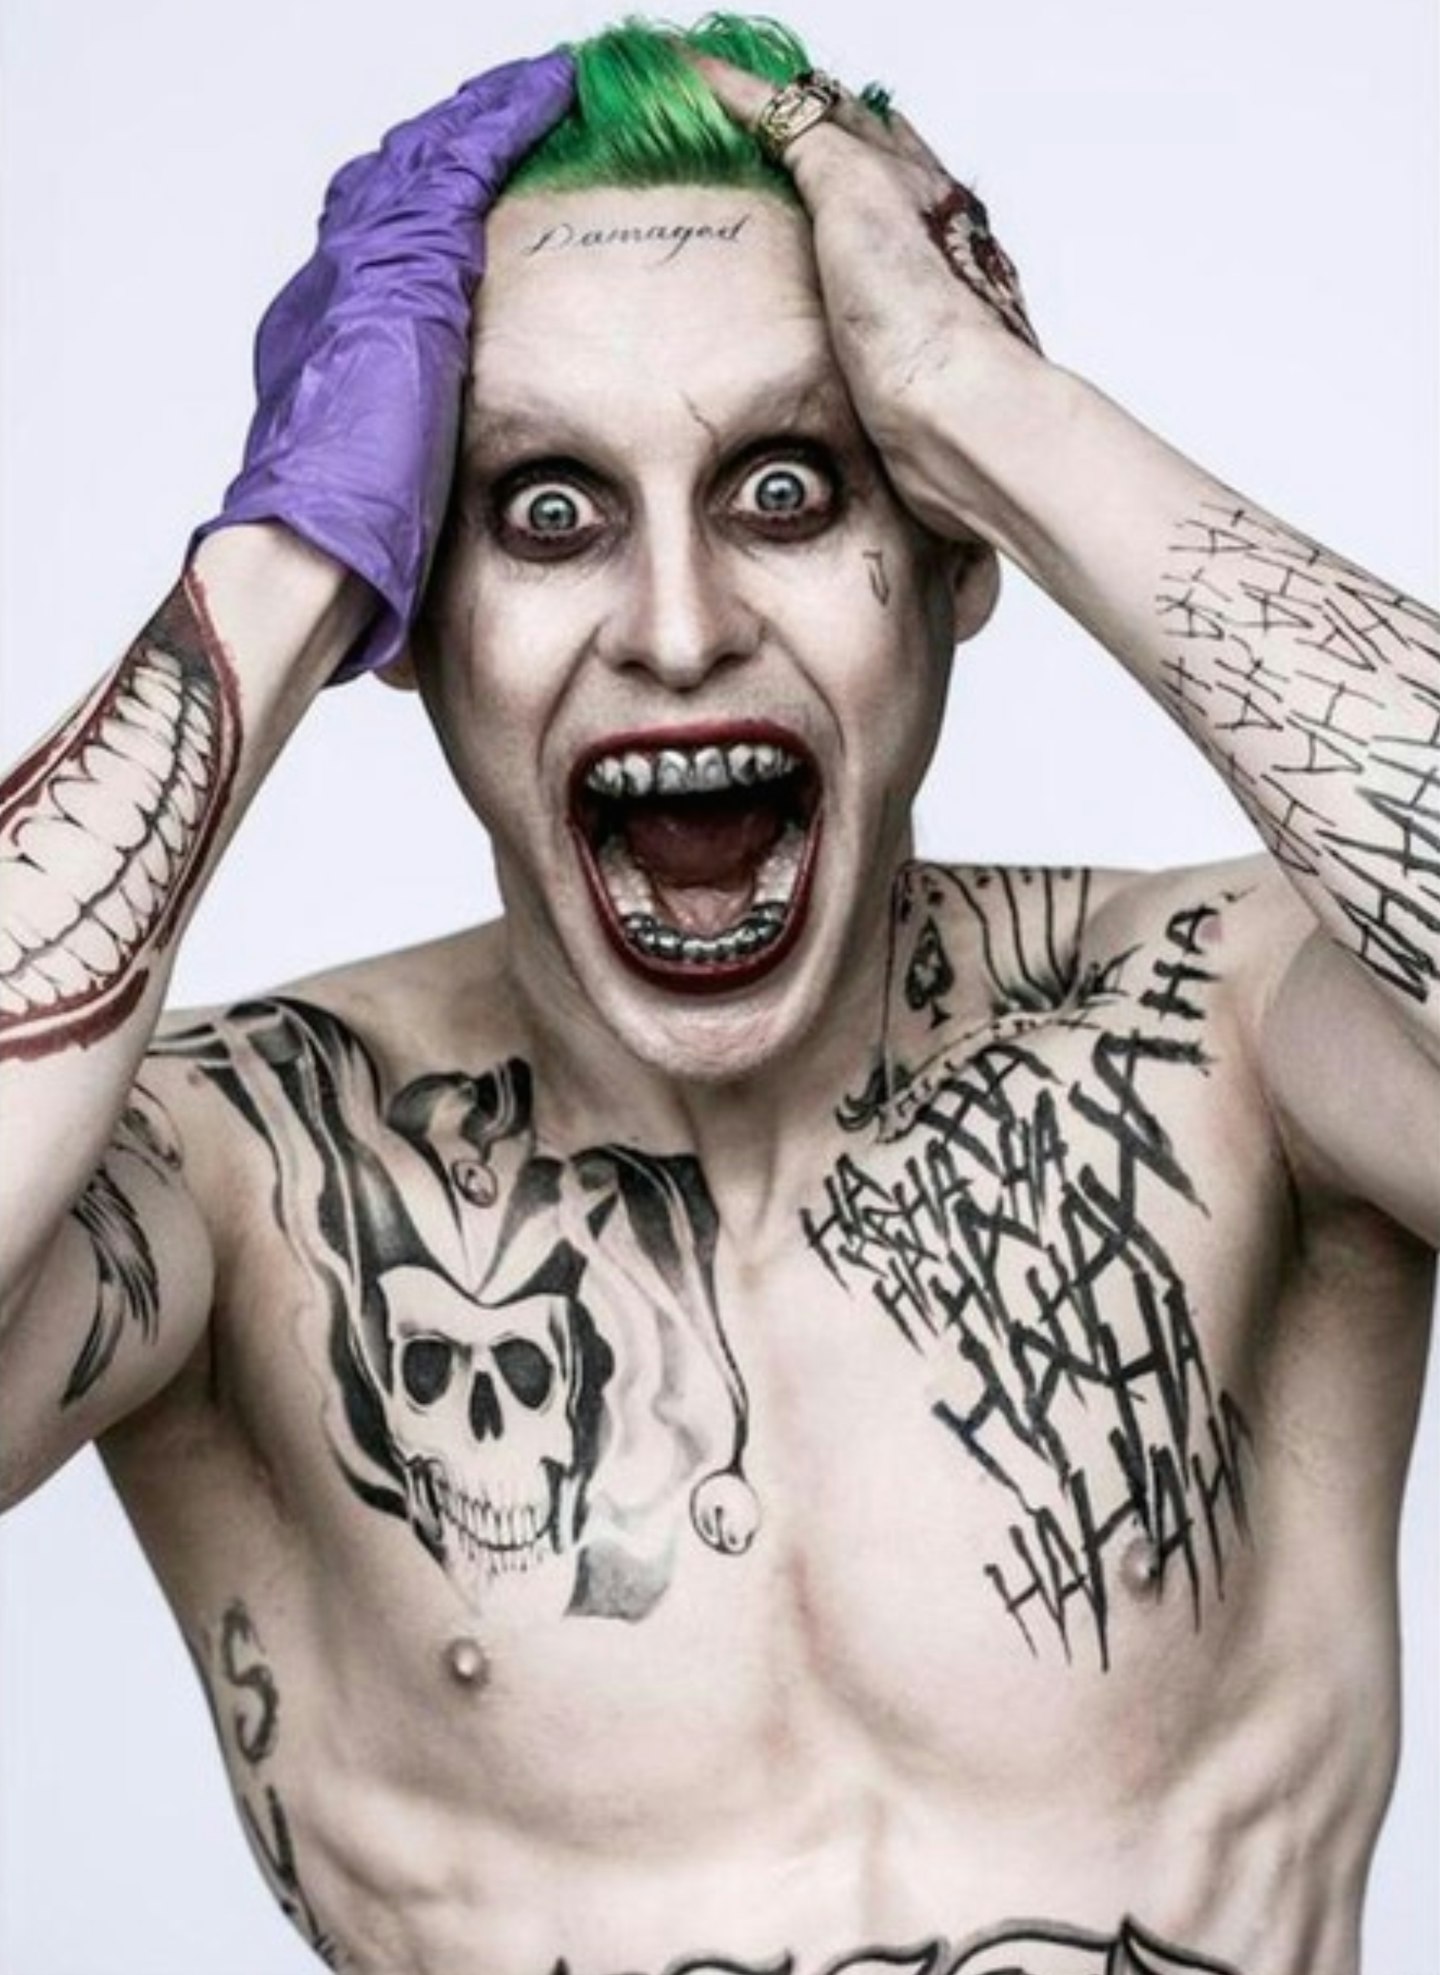 Jared Leto - first official image as The Joker